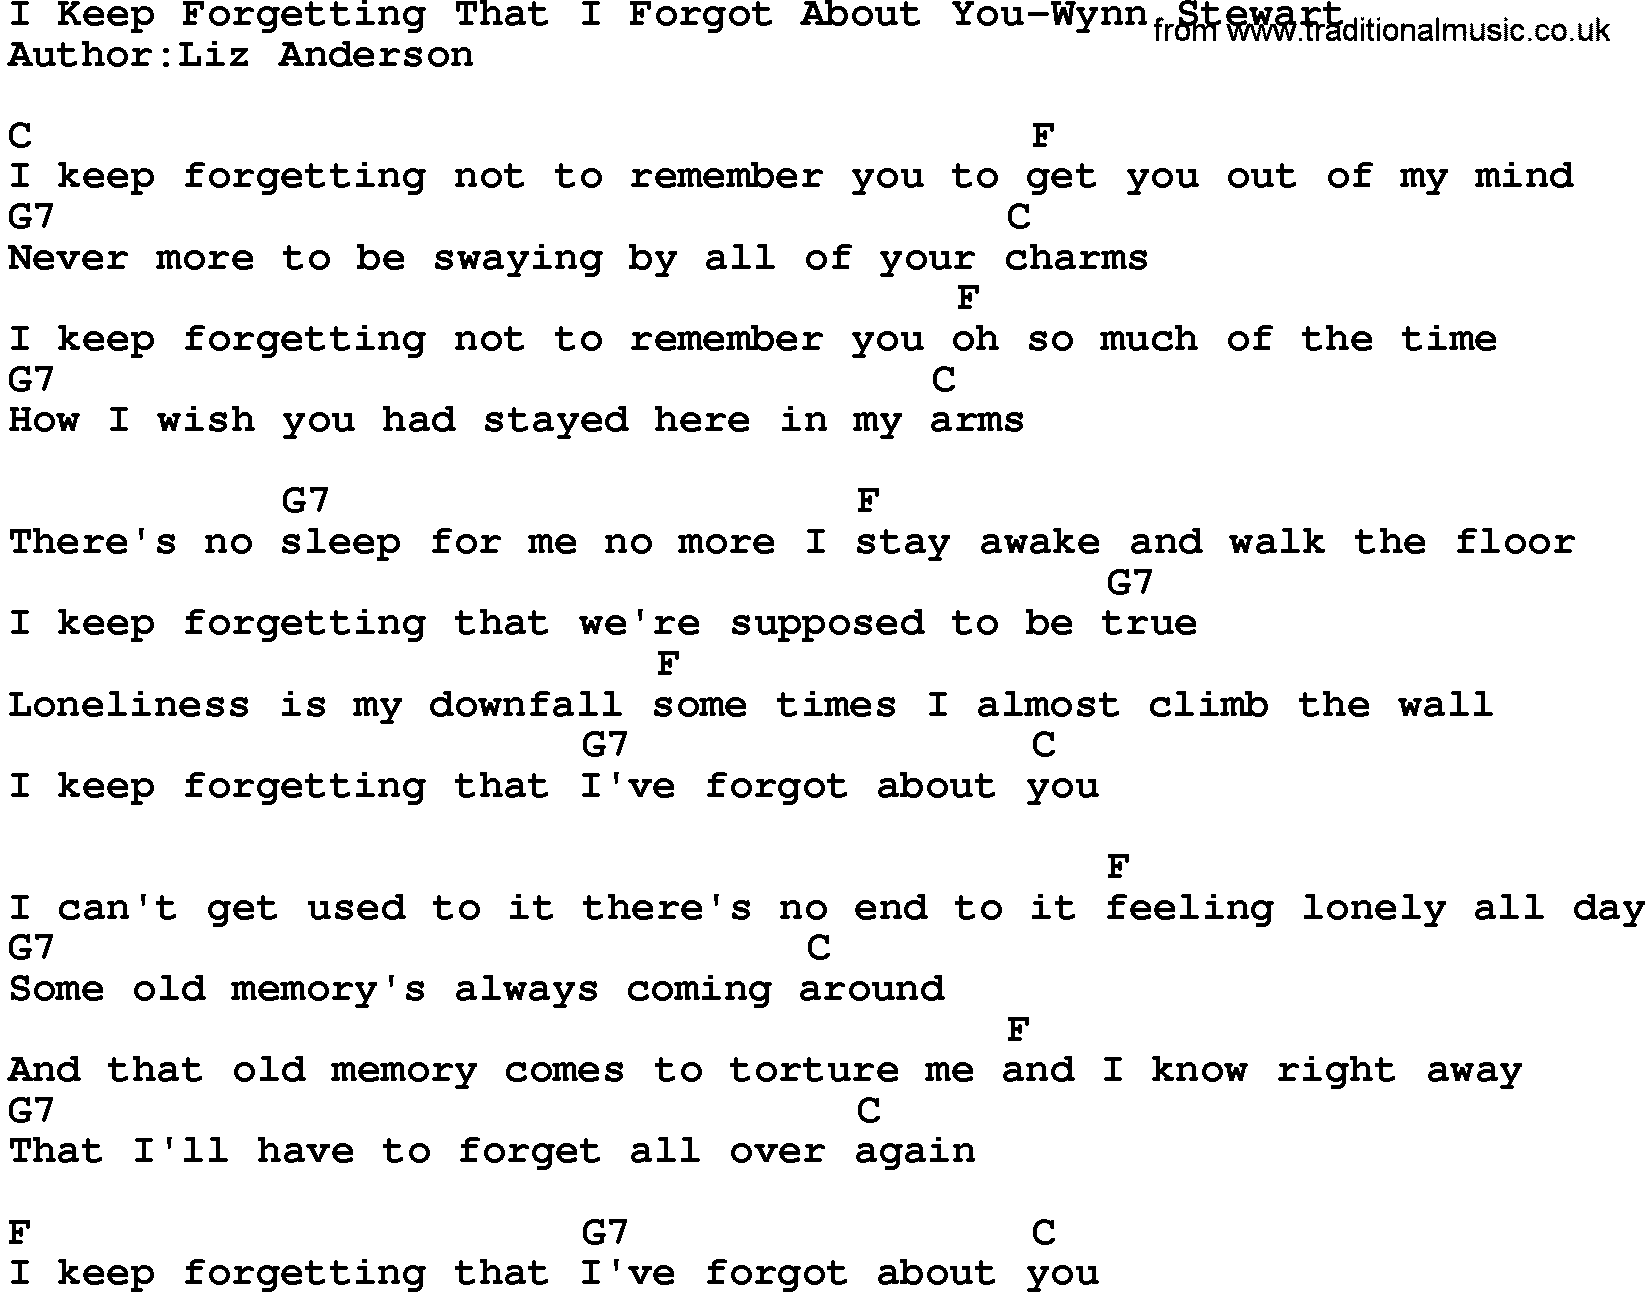 Country music song: I Keep Forgetting That I Forgot About You-Wynn Stewart lyrics and chords